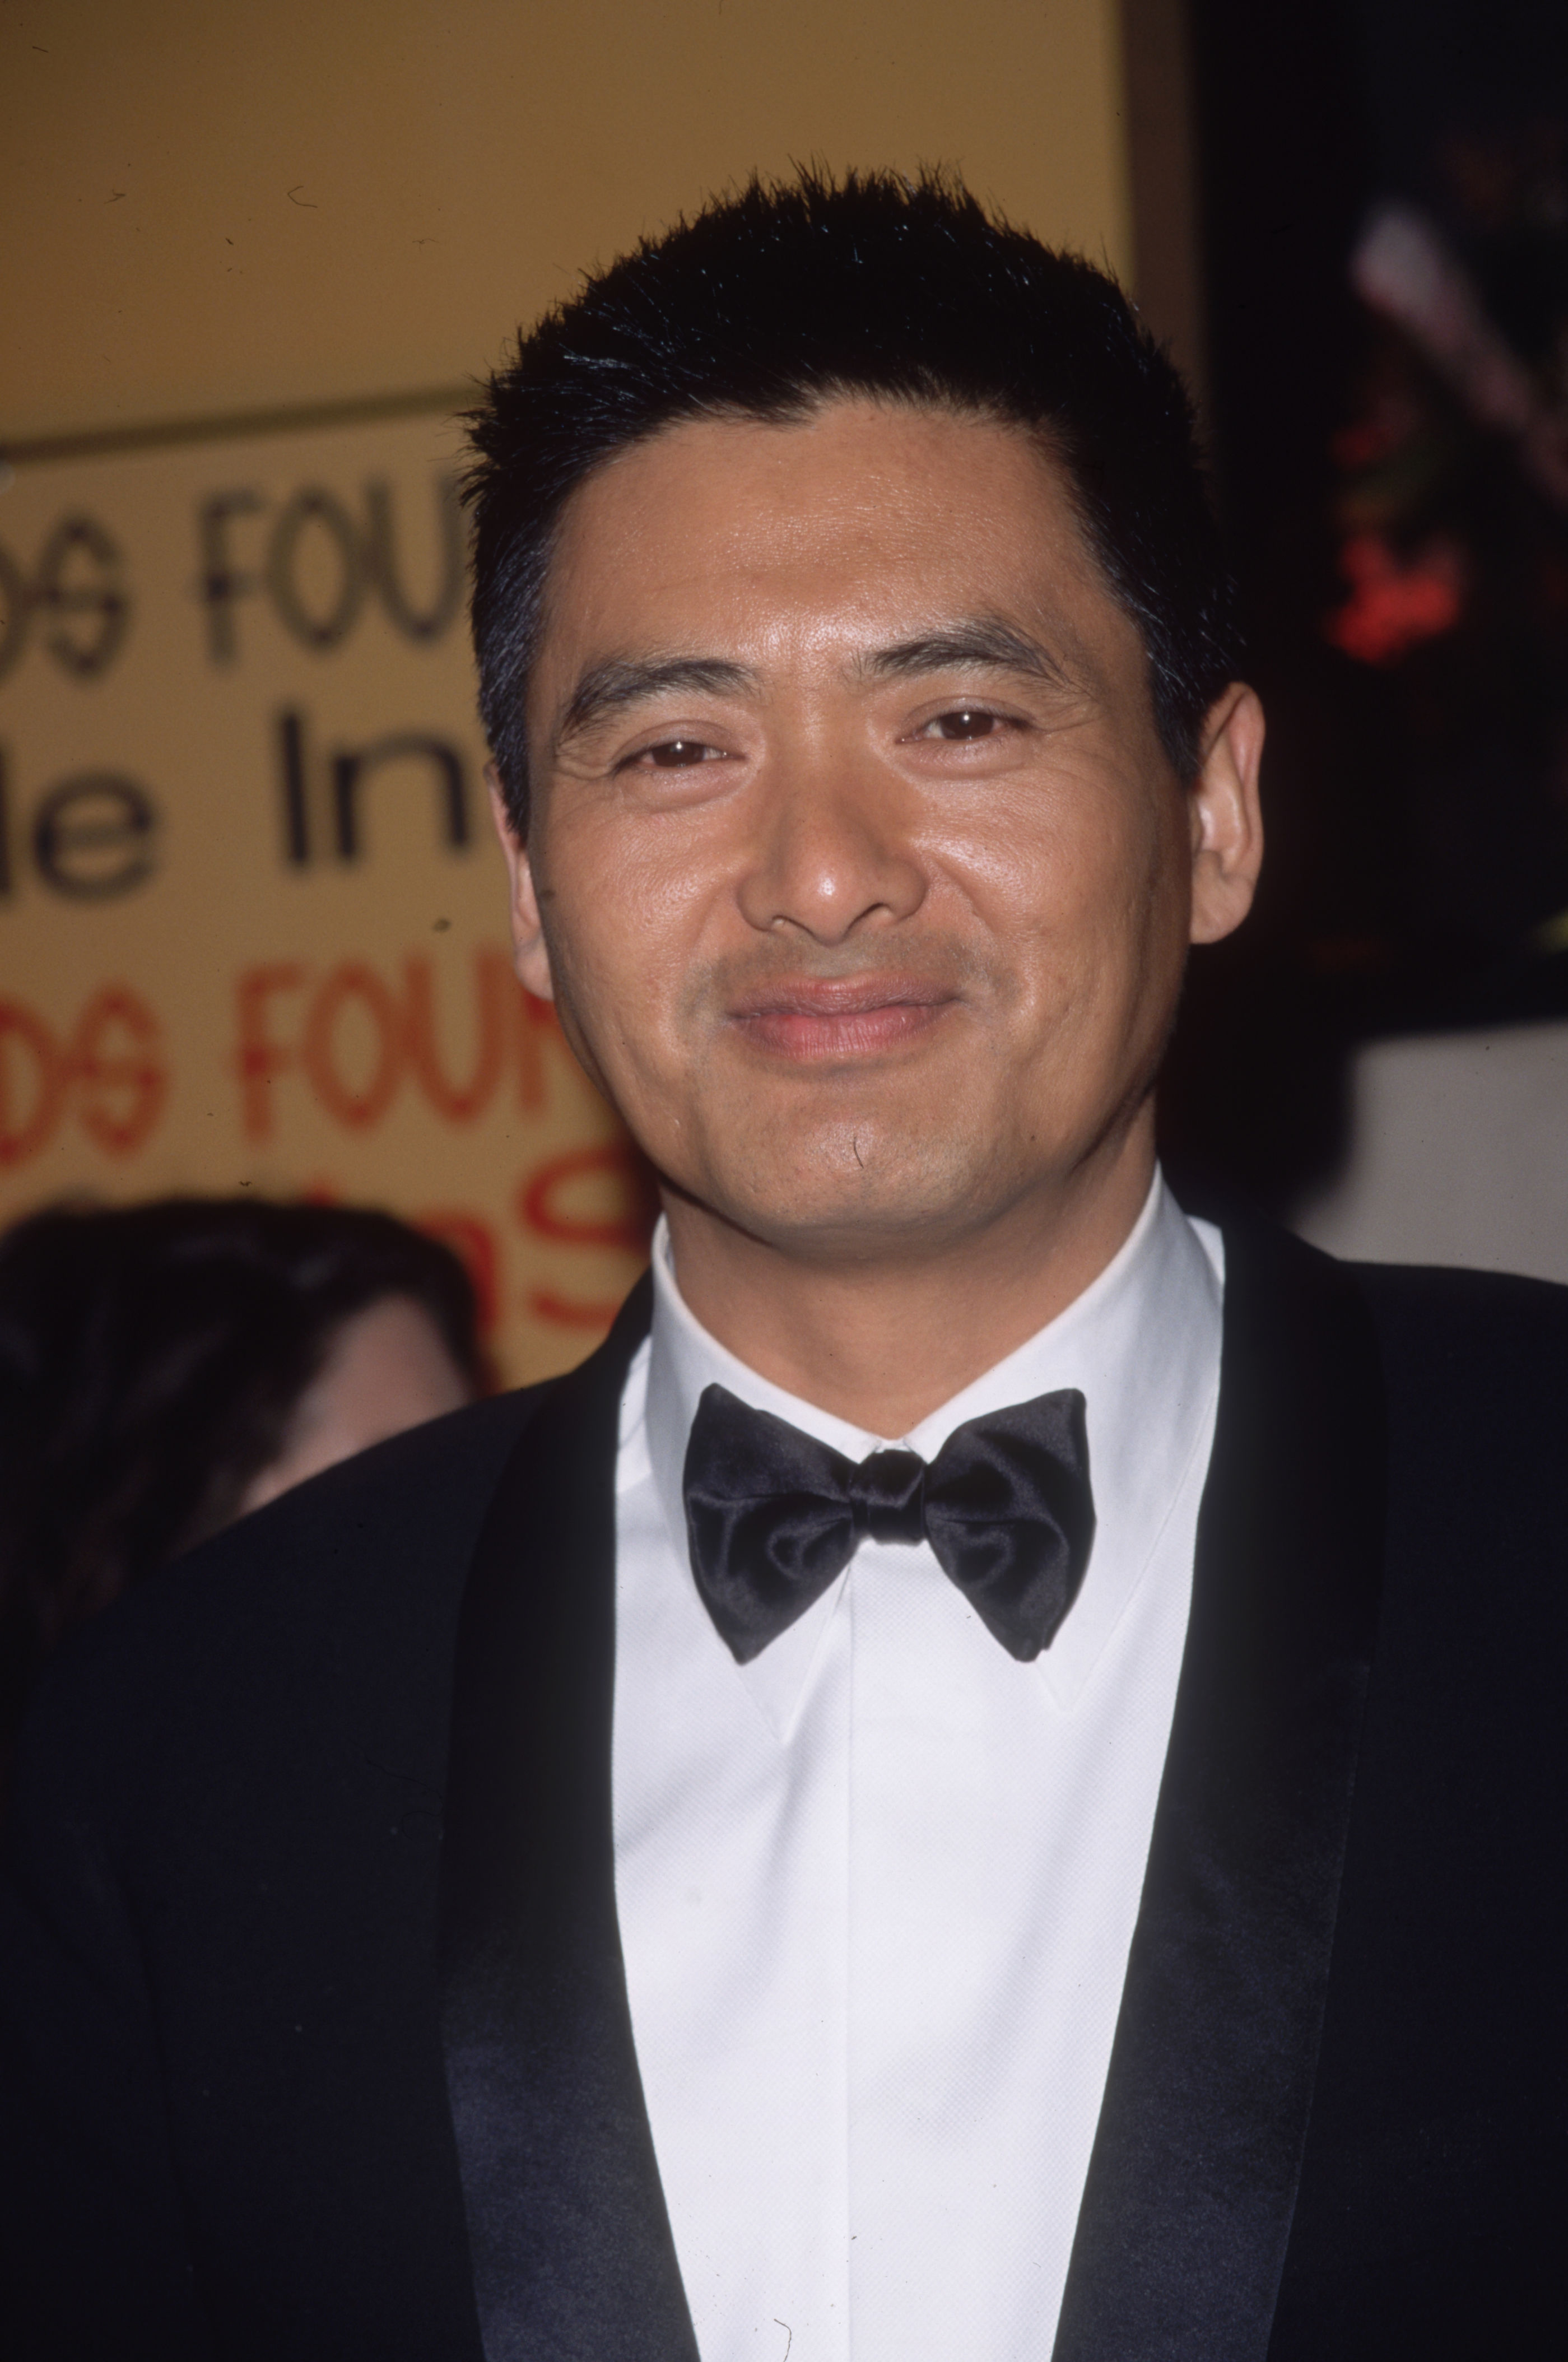 <p>When "Crouching Tiger, Hidden Dragon" took Hollywood by storm in 2000, so did its star, Chow Yun-Fat. By that point, he was already more than a decade into subtly tweaking his appearance Can you guess how?</p>